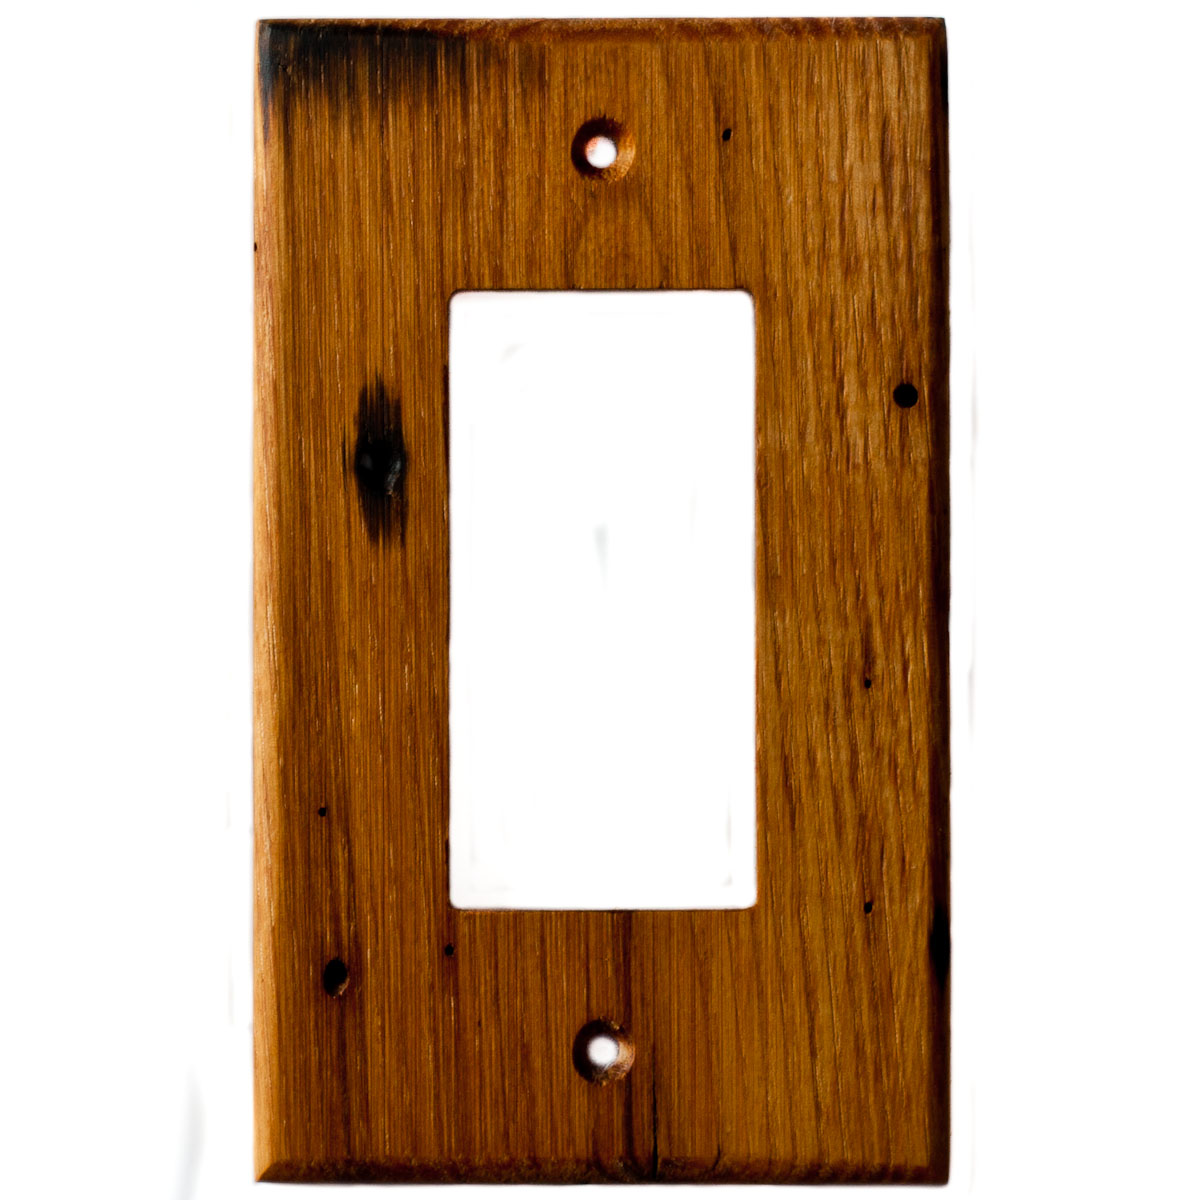 Wormy Chestnut Reclaimed Wood Wall Plate - 1 Gang Light Switch Cover -  Virgin Timber Lumber